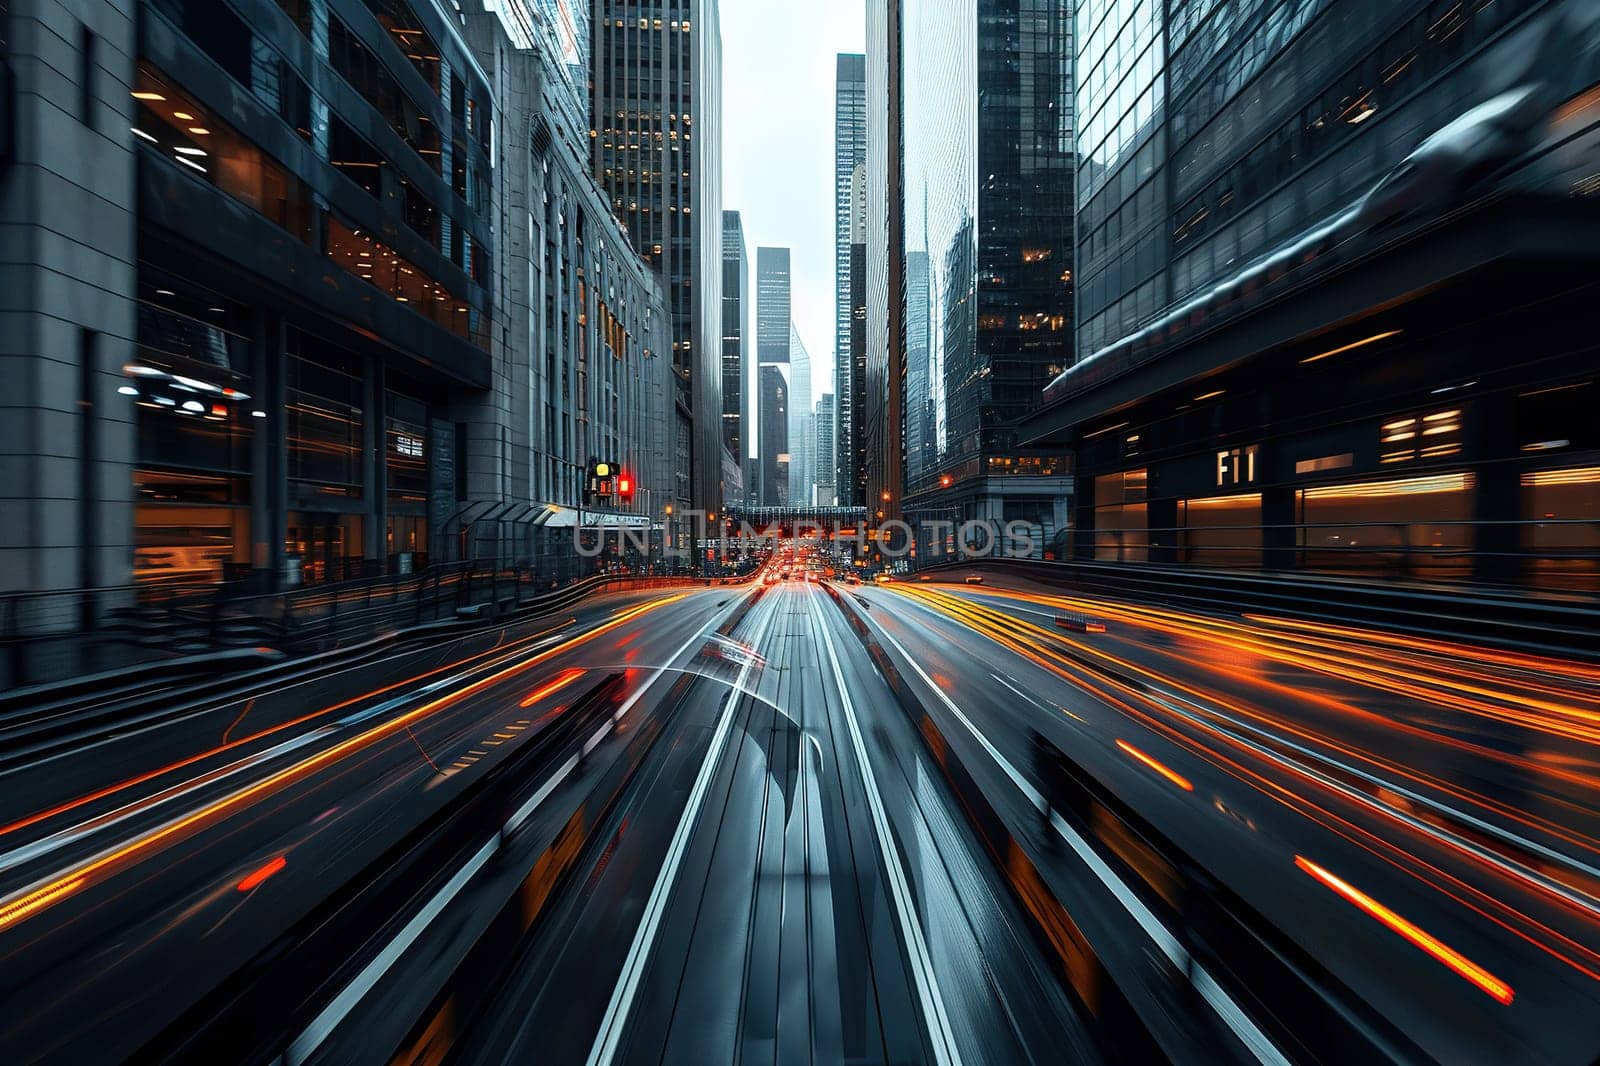 Photo in motion depicting a highway in a metropolis. Light paths against the background of skyscrapers.